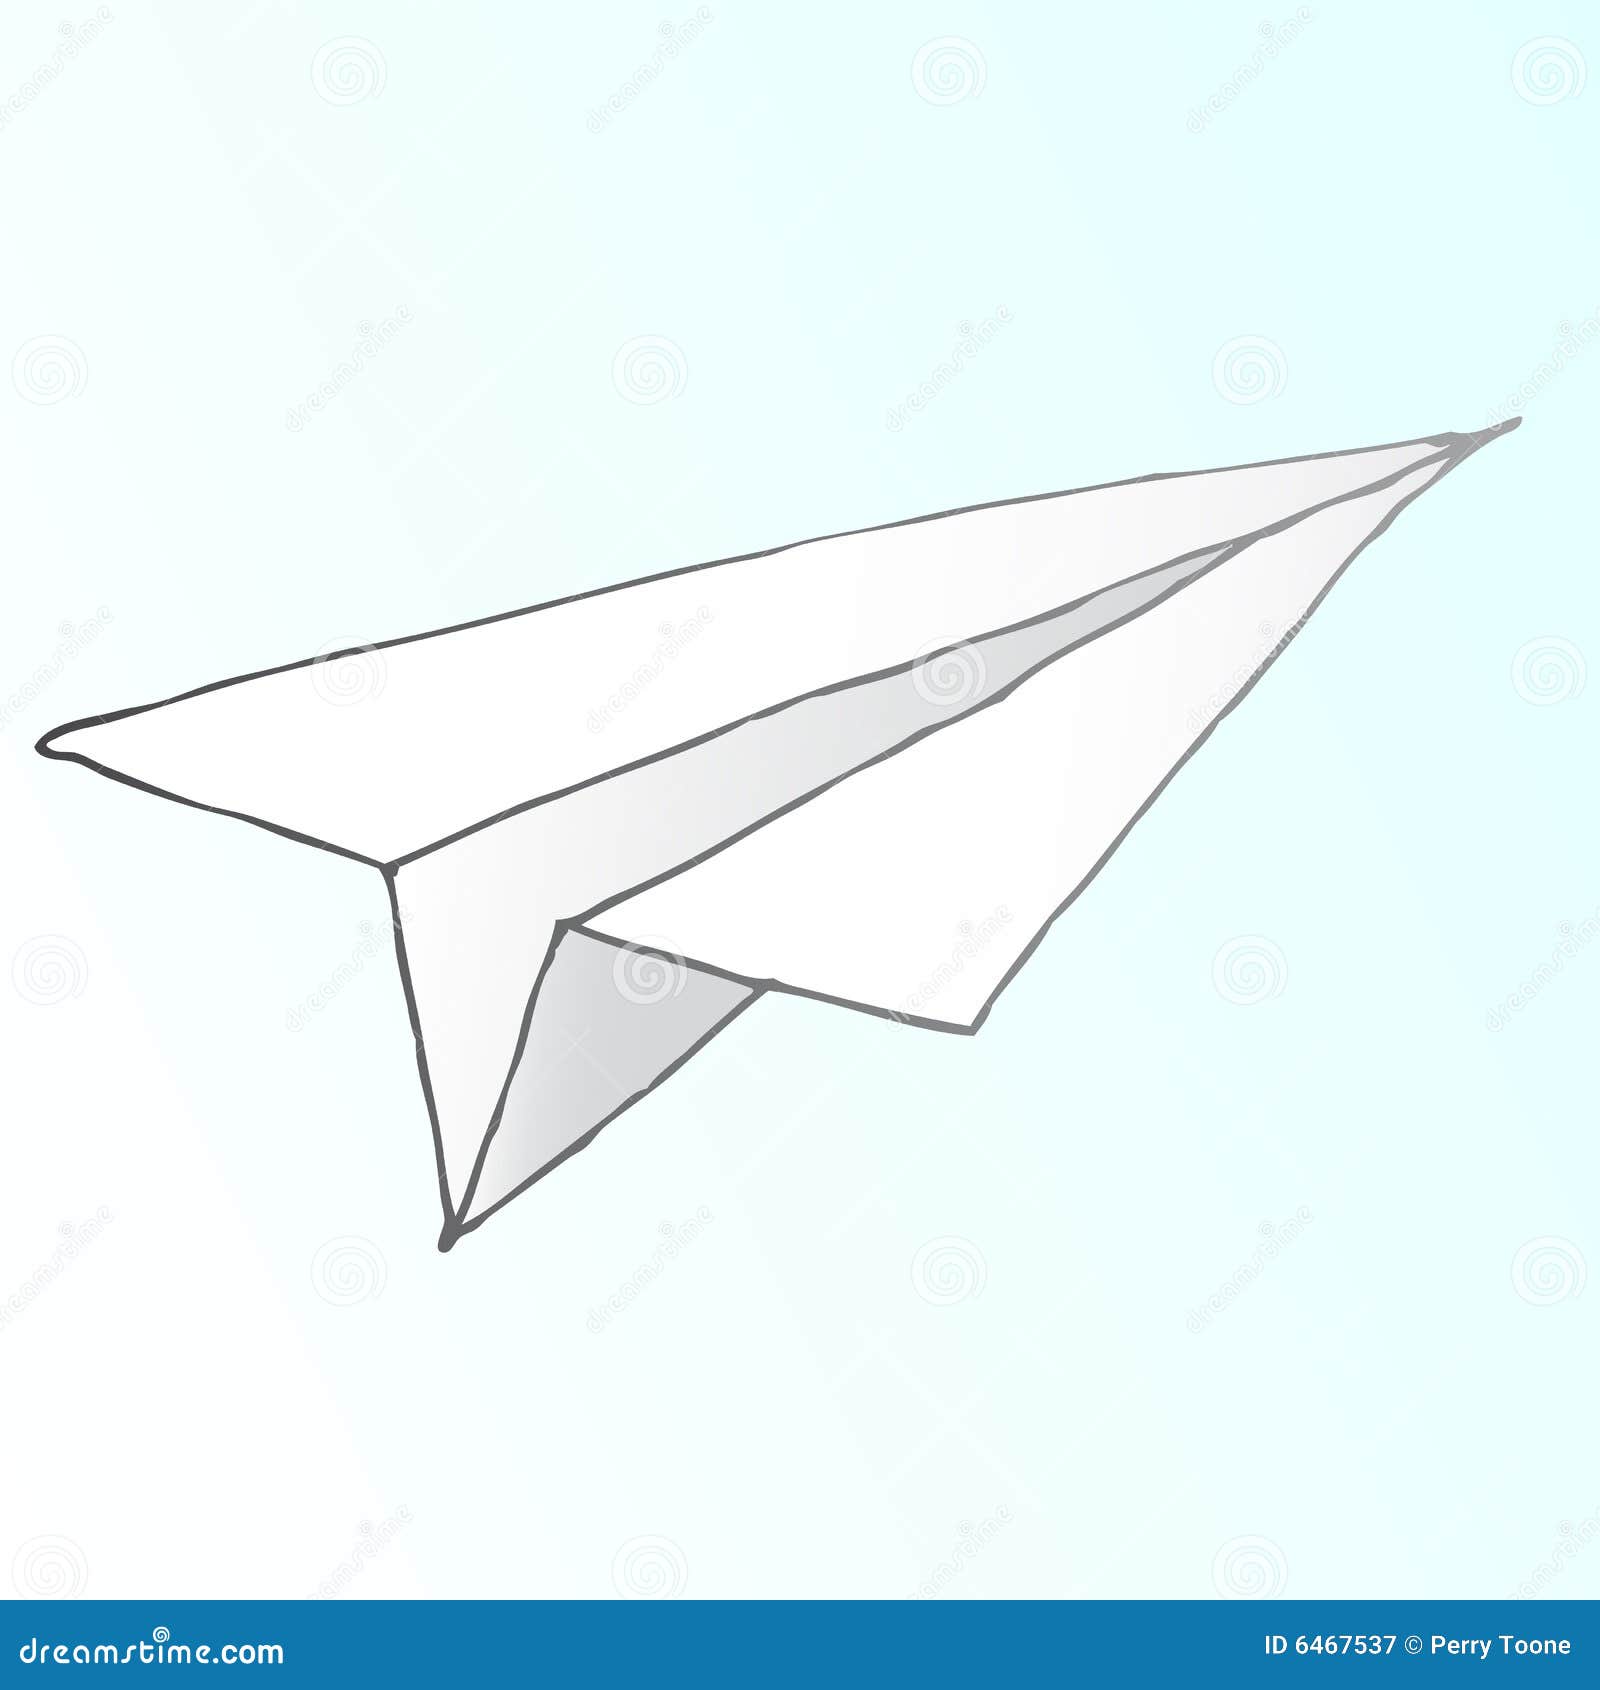 paper airplane clipart - photo #49